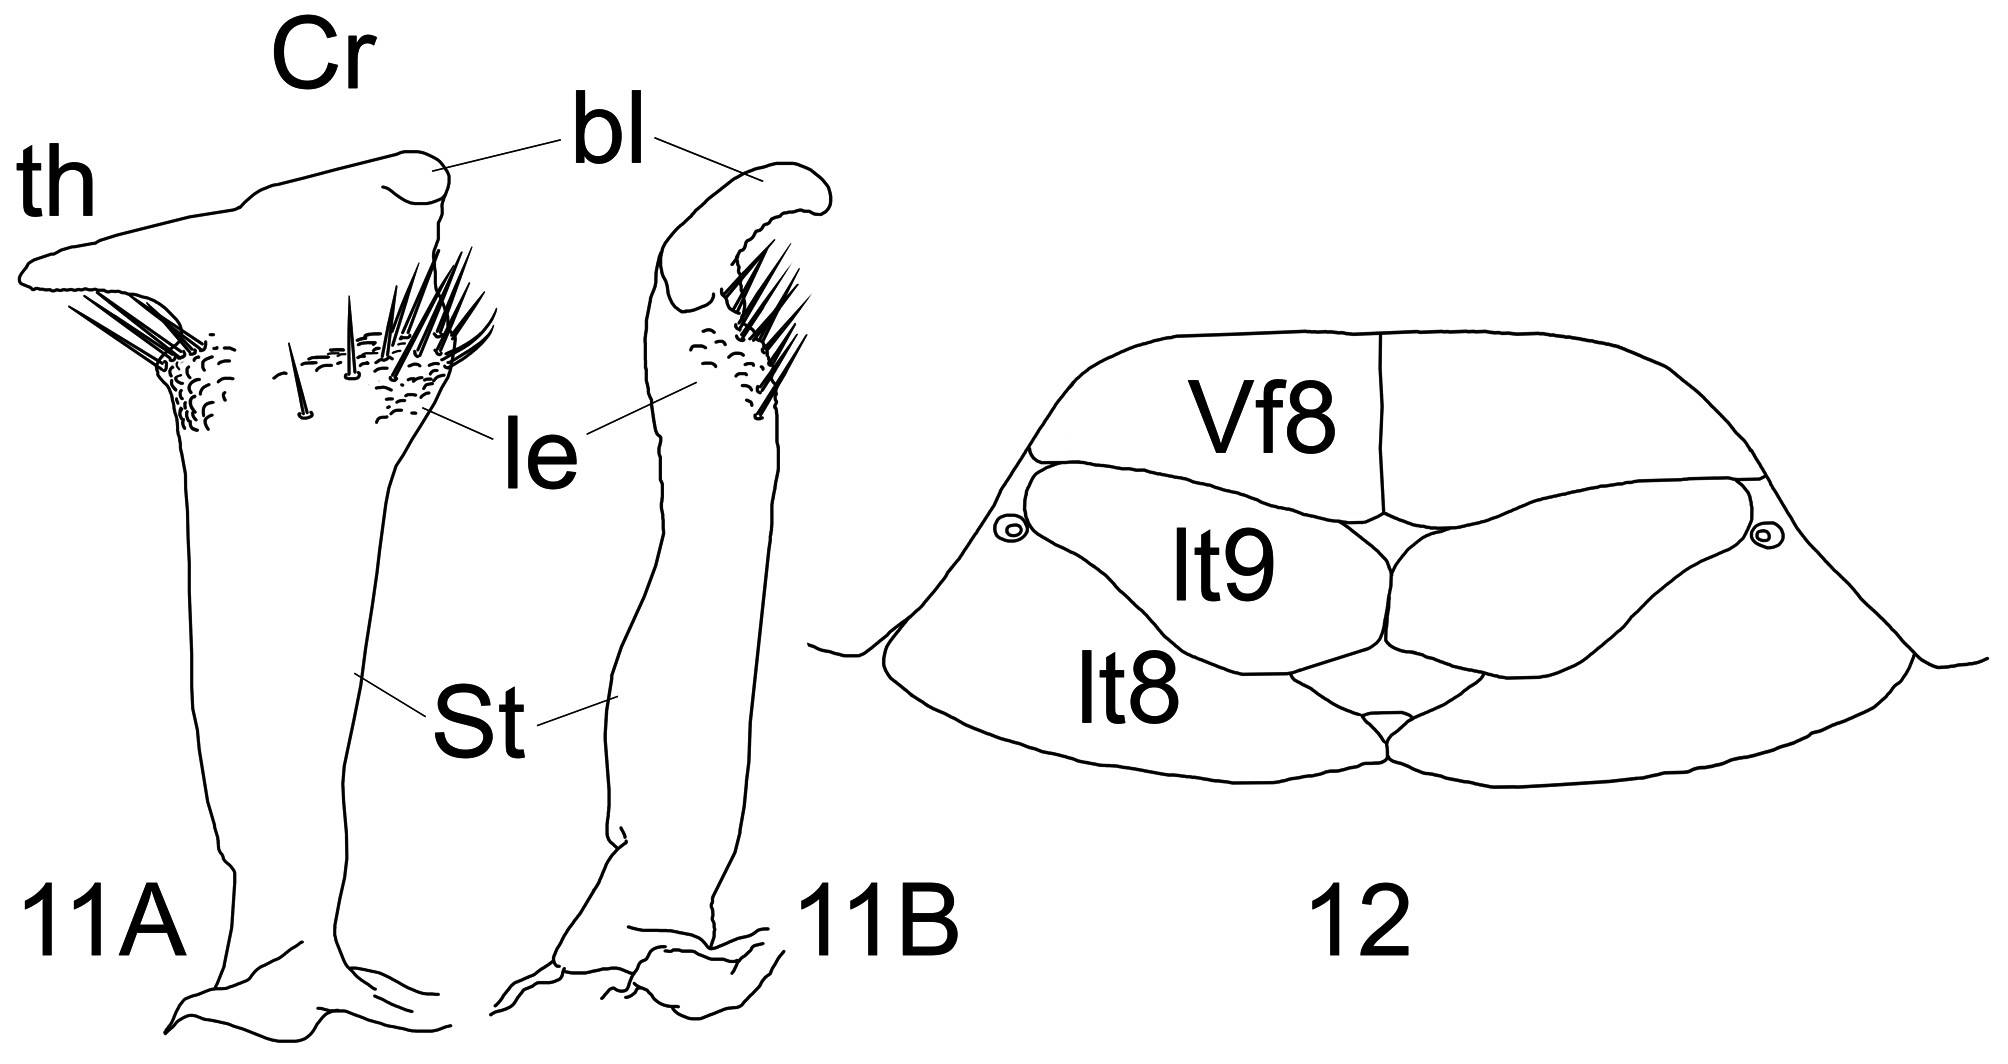 Aedeagus lateral view: 90, 92, 94, 96, 98, 100; parameres dorsal